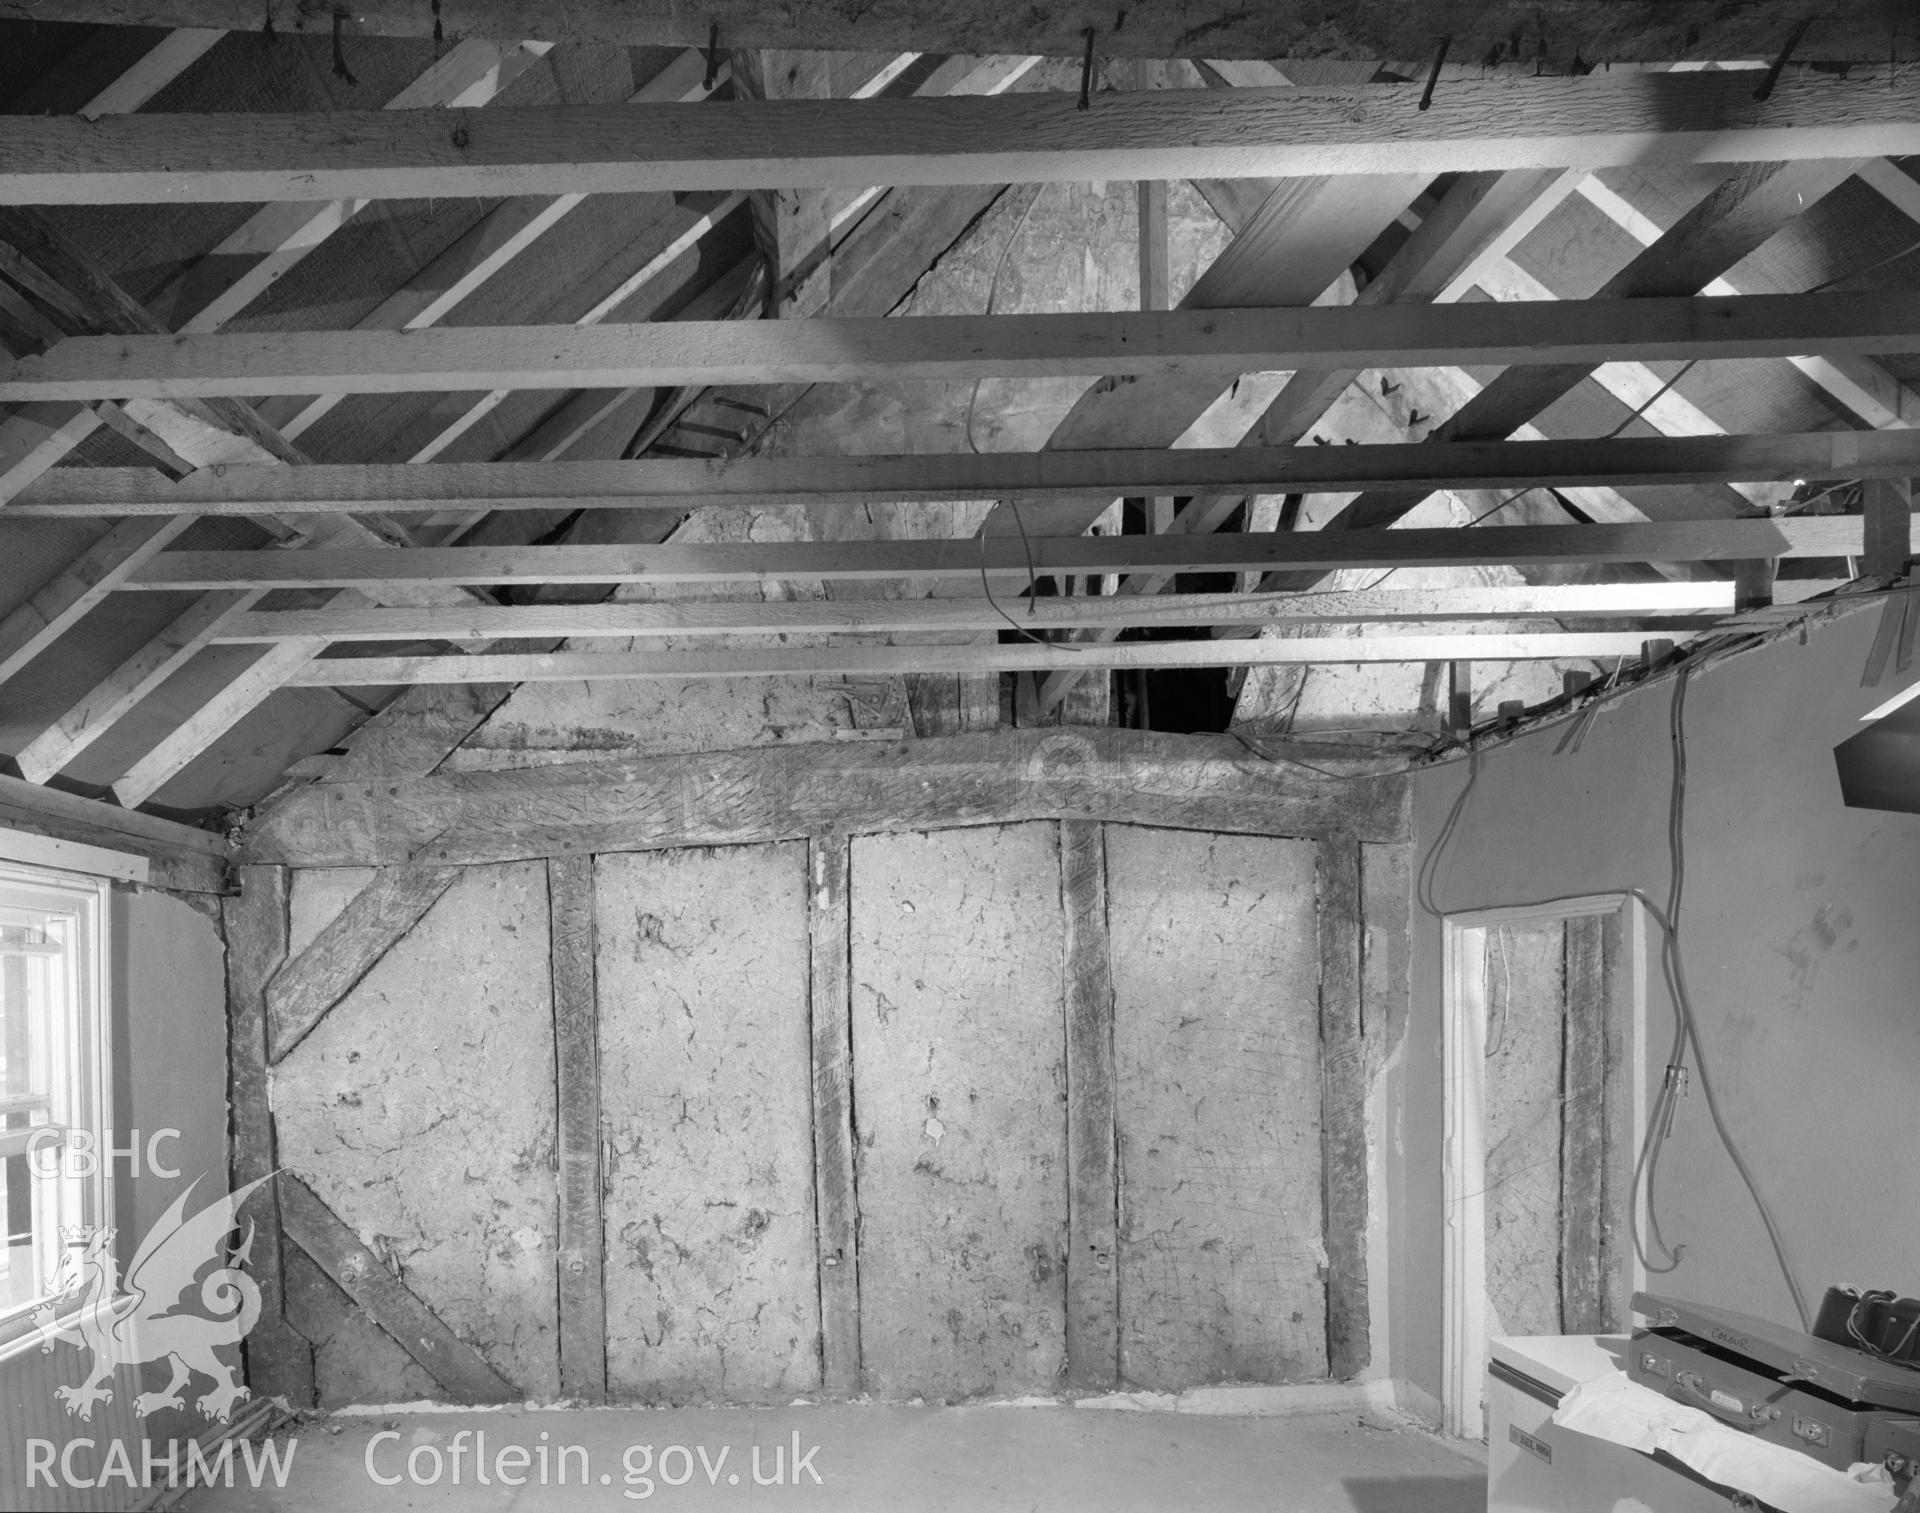 Black and white acetate negative showing interior view of George and Dragon Inn, Beaumaris.